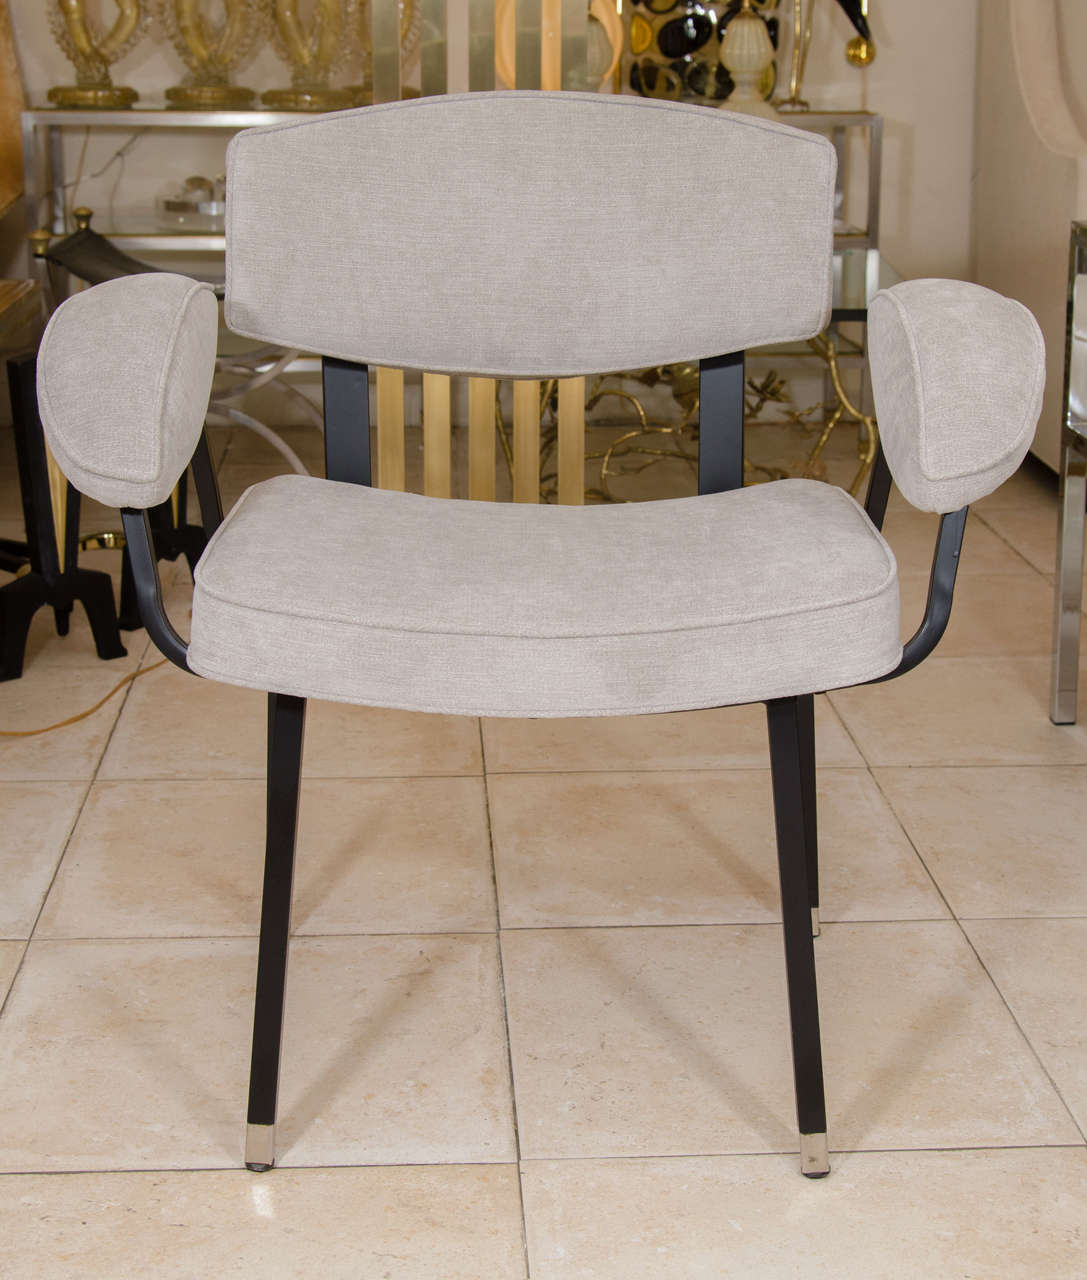 Upholstered dining armchair with black enameled metal frame and polished nickel details by Forma Nova, Italy.